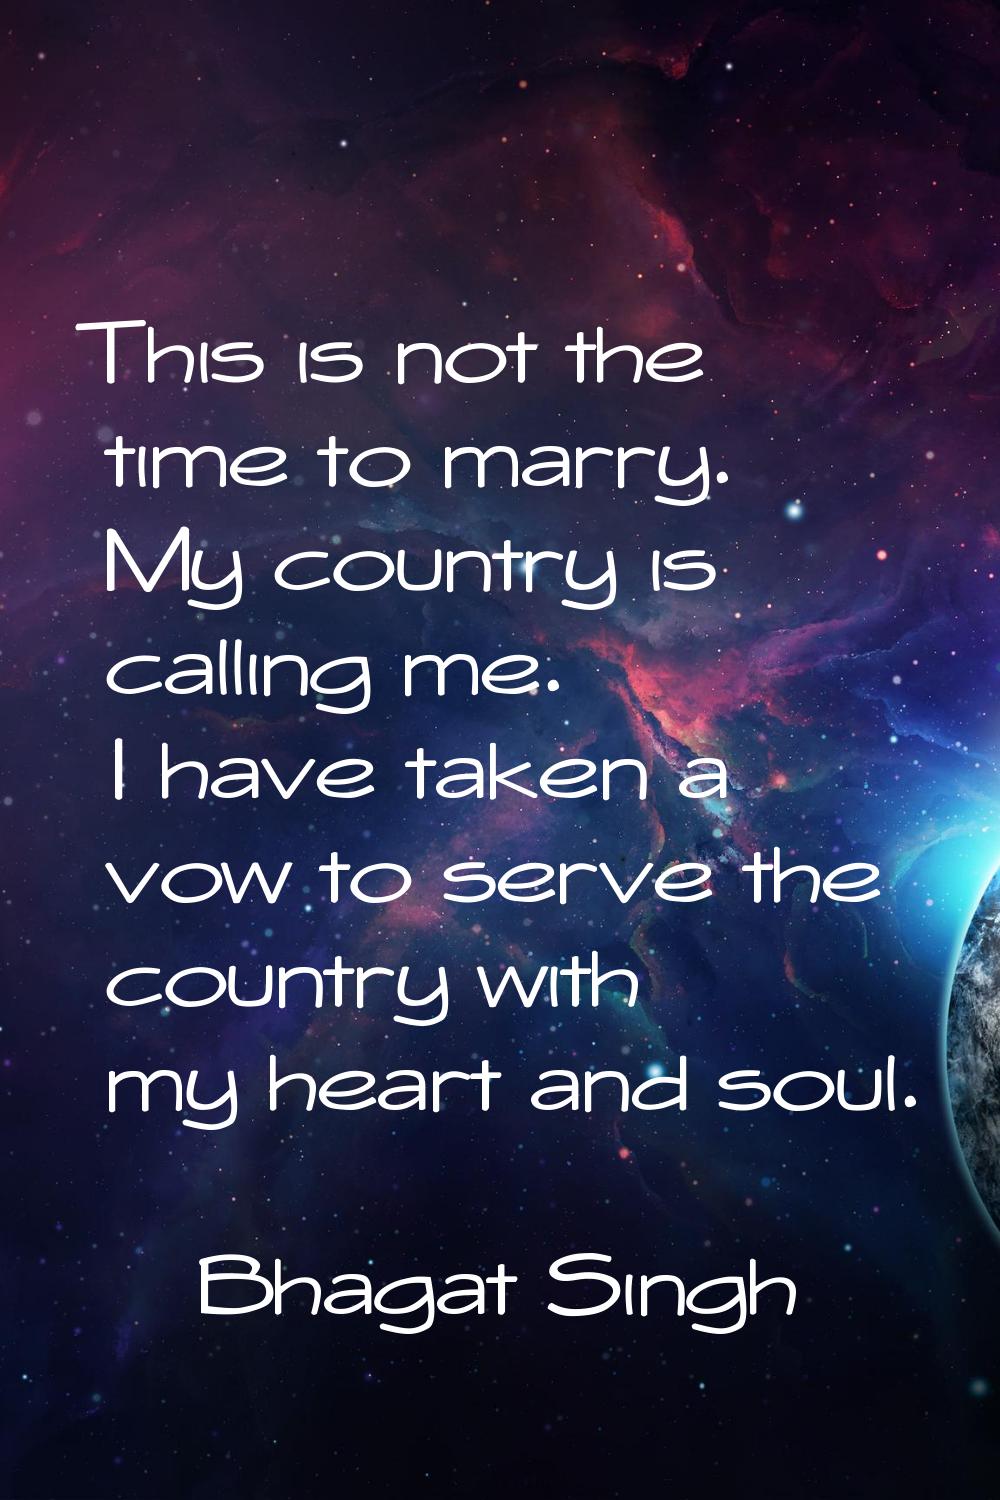 This is not the time to marry. My country is calling me. I have taken a vow to serve the country wi